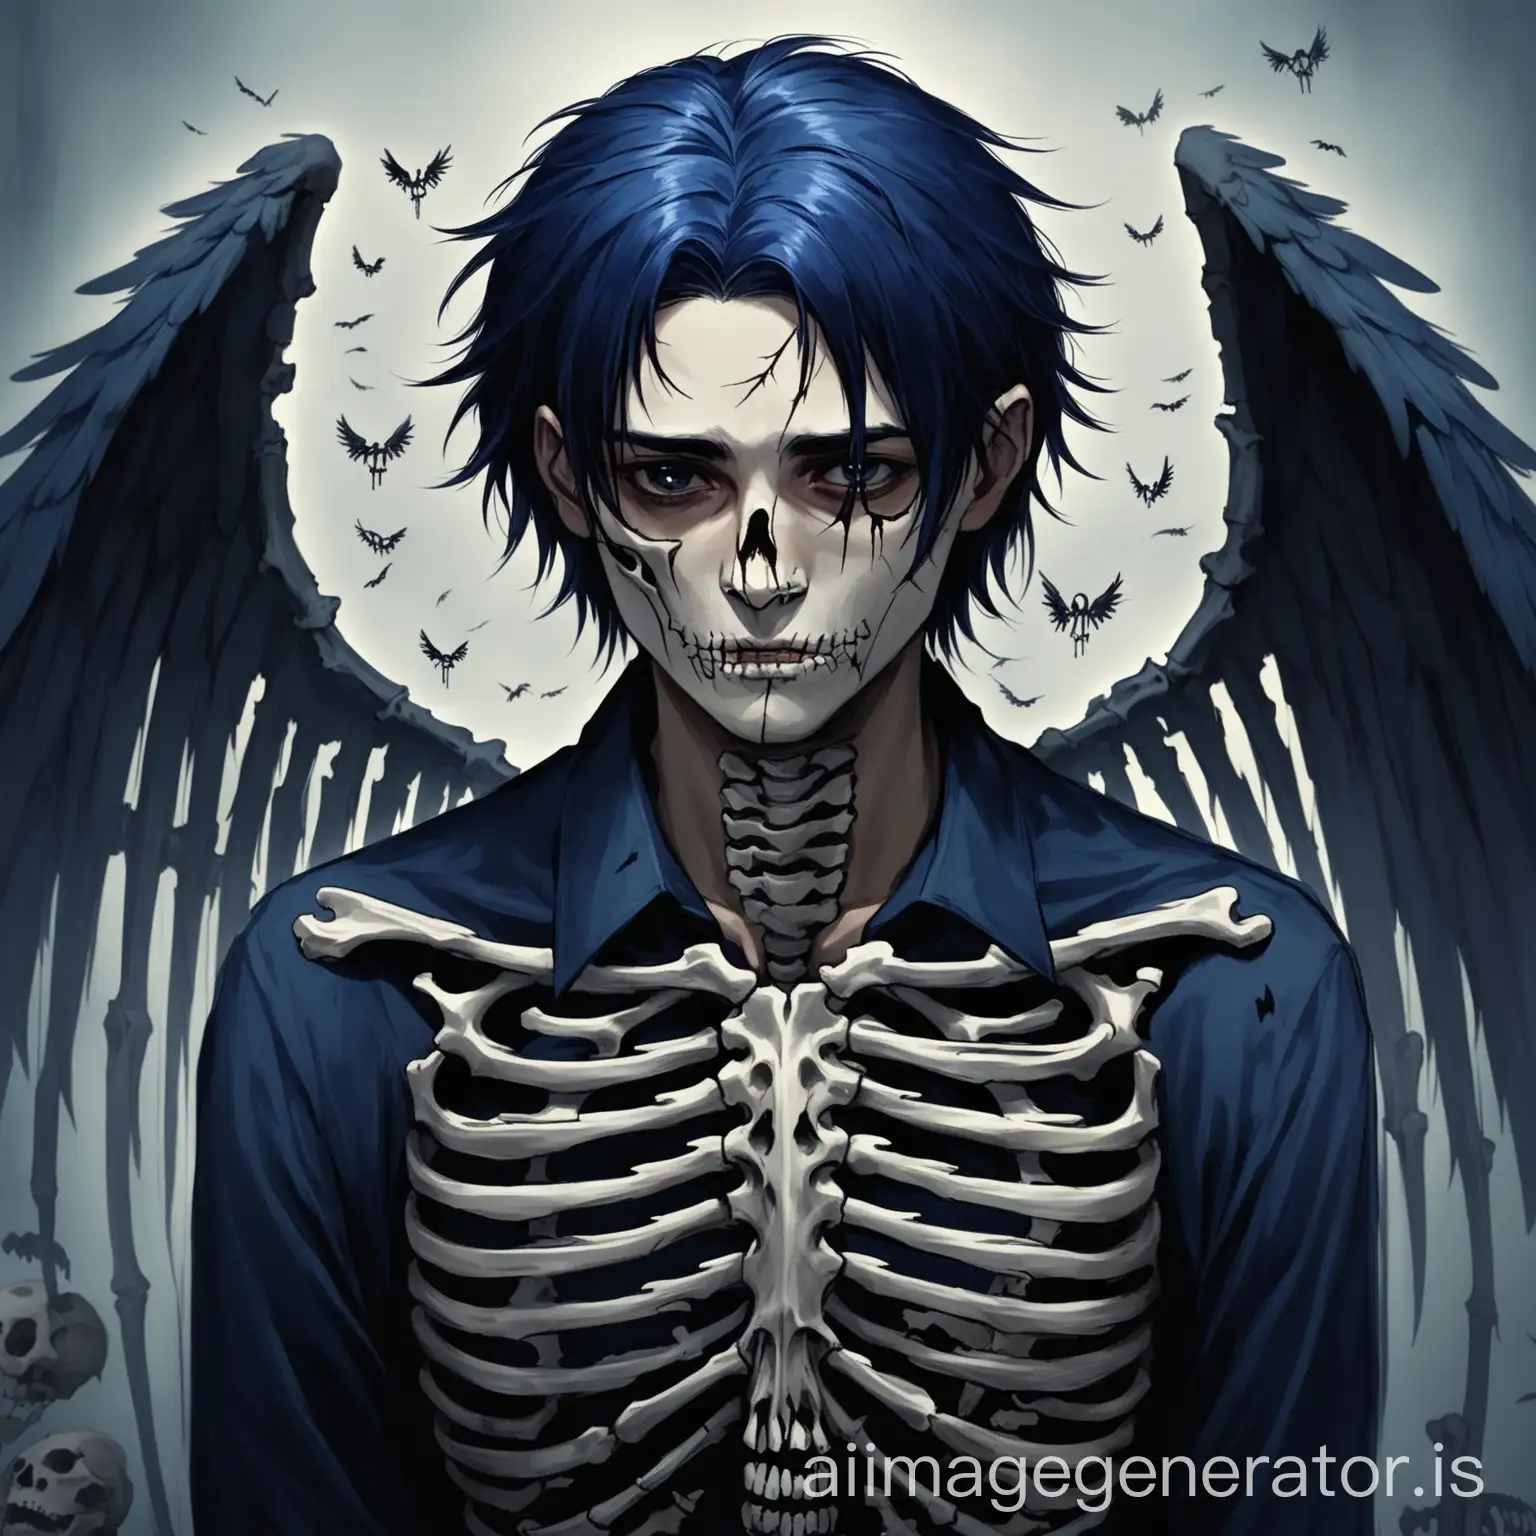 Guy with dark blue hair, with bones as wings, scar on his face.